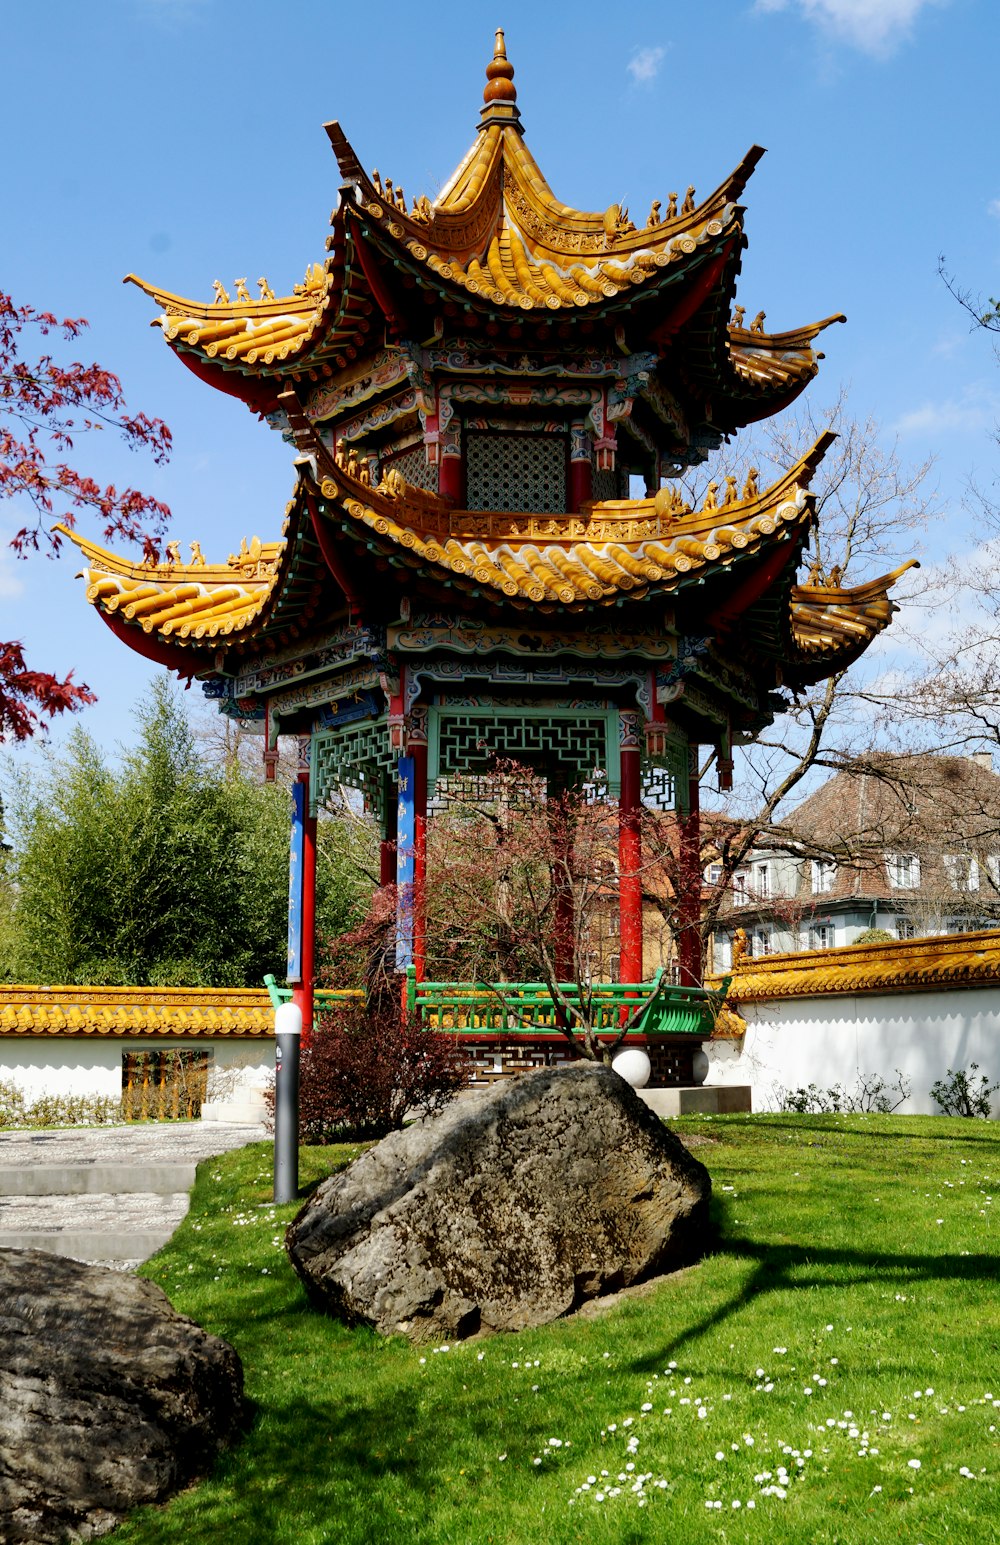 a pagoda in the middle of a grassy area